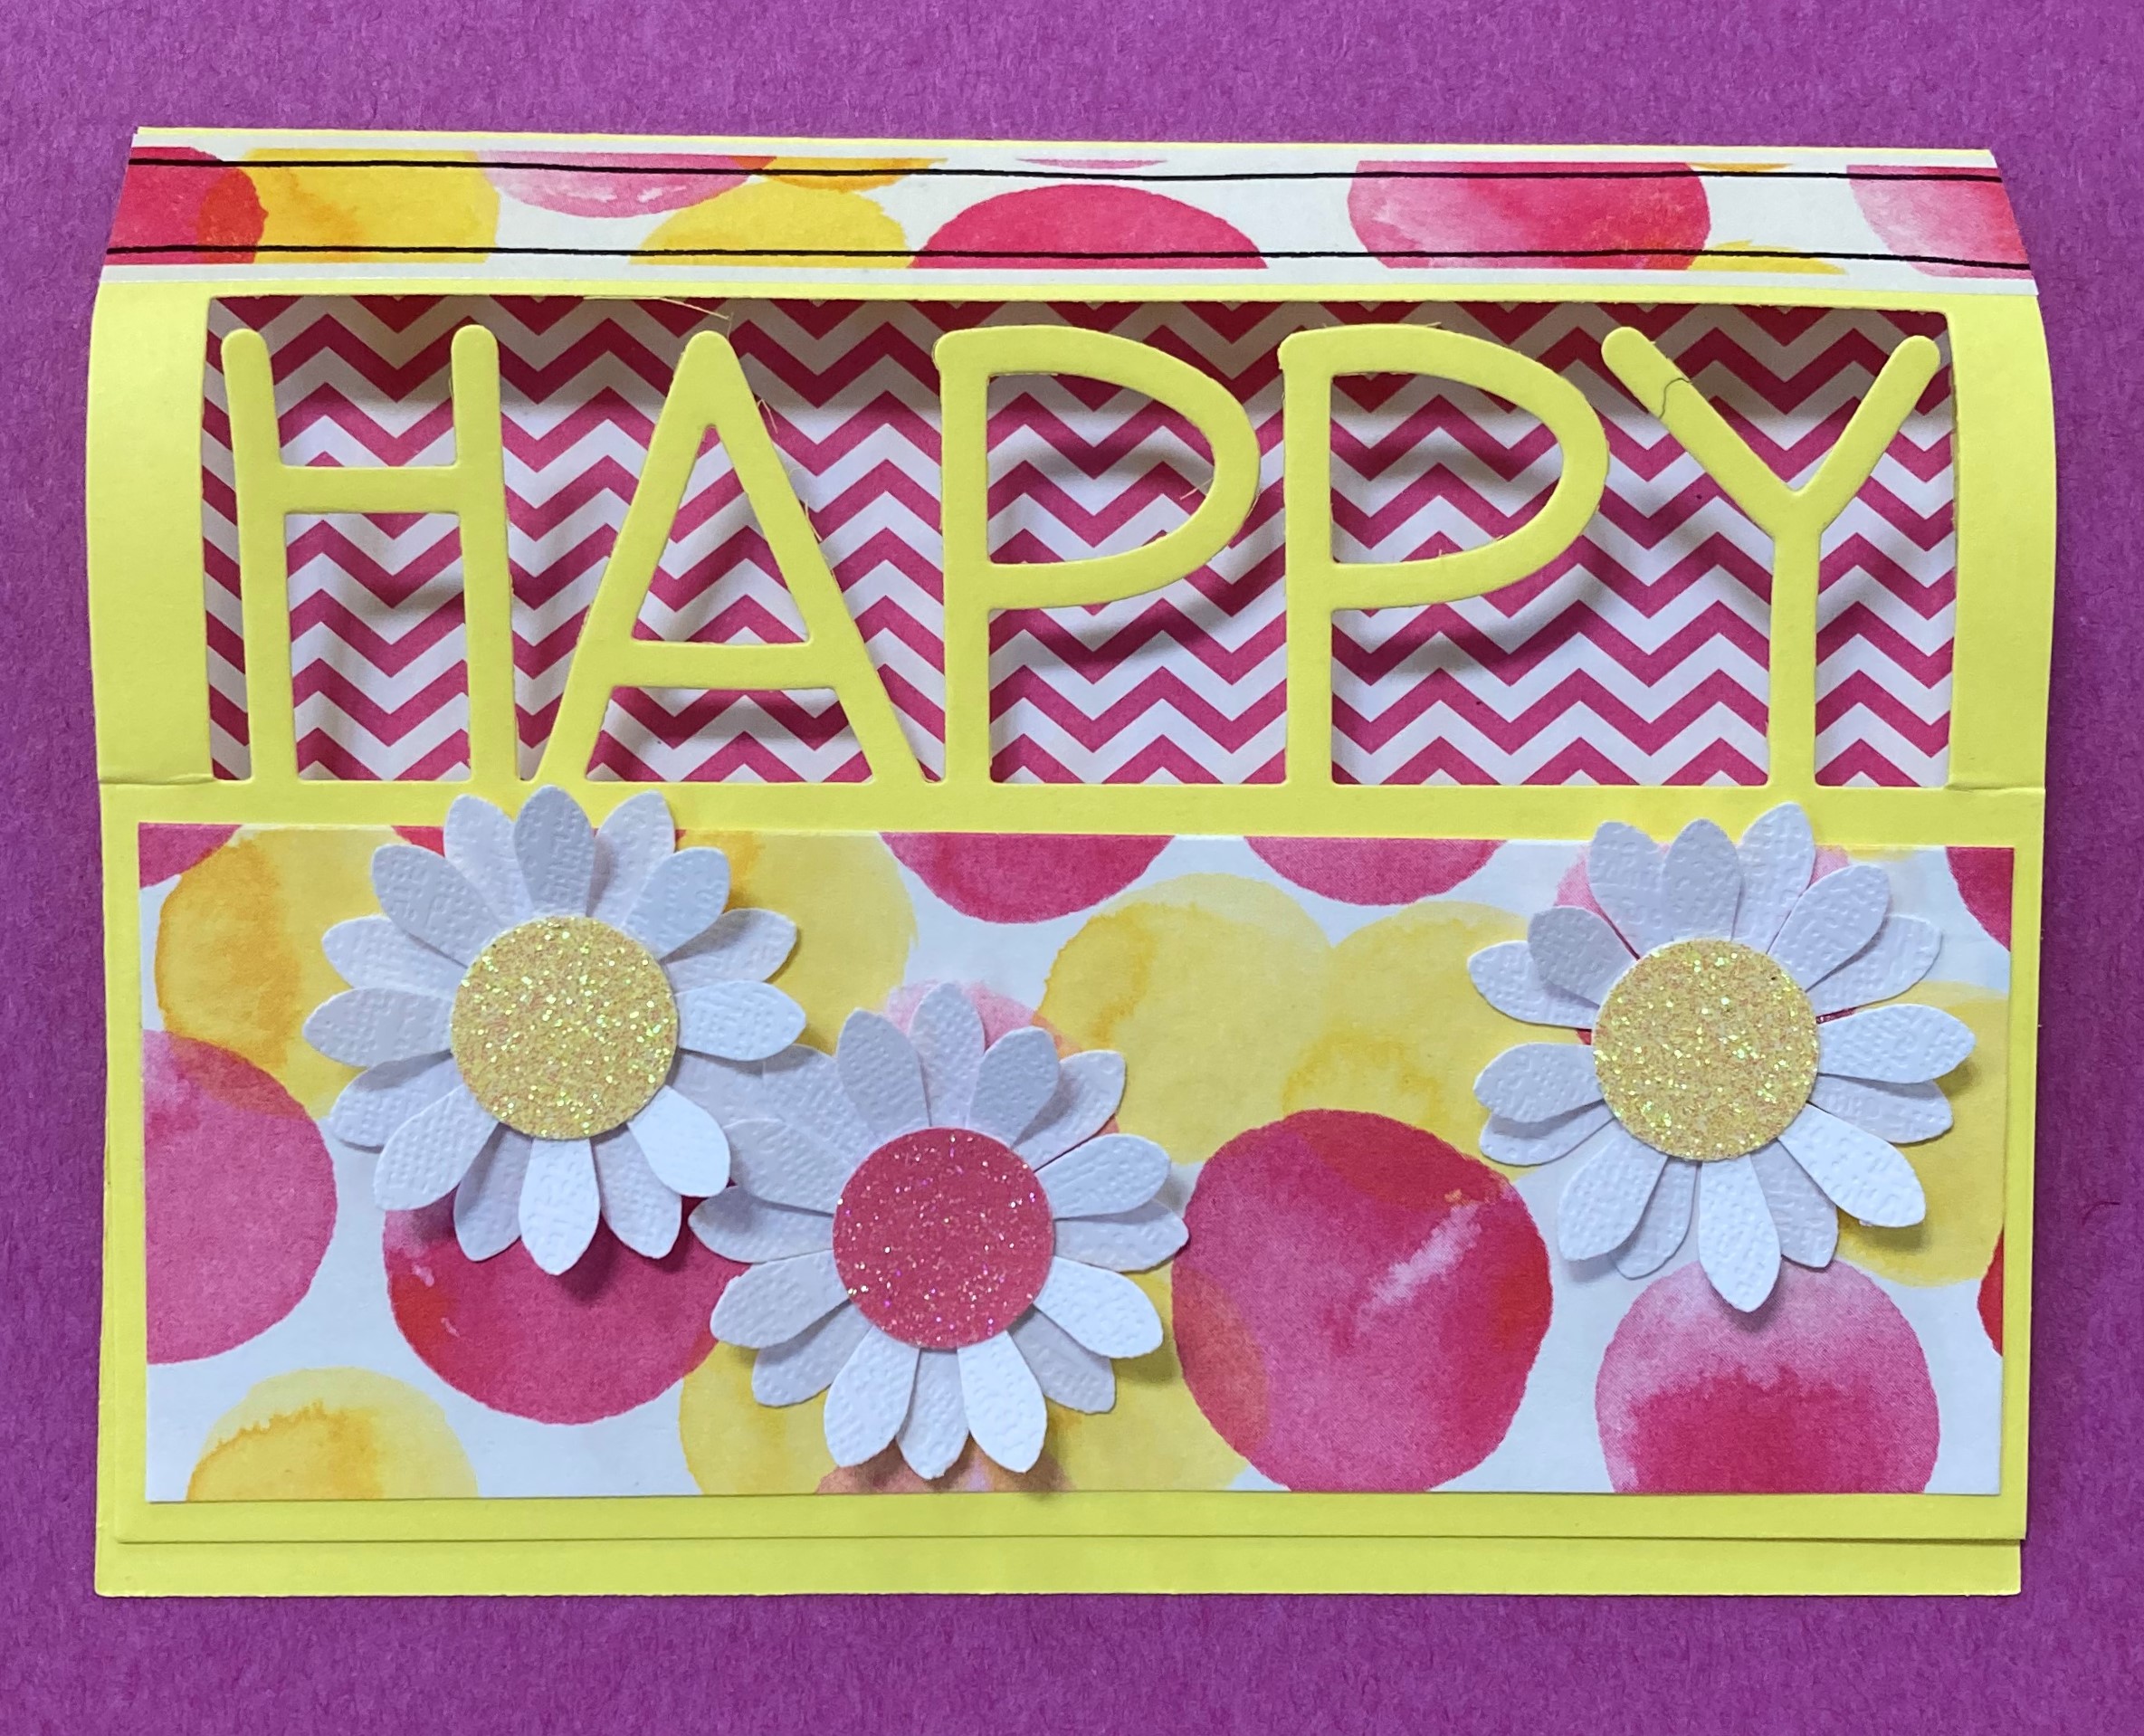 Three dimensional easel greeting card with HAPPY in large letters and flowers